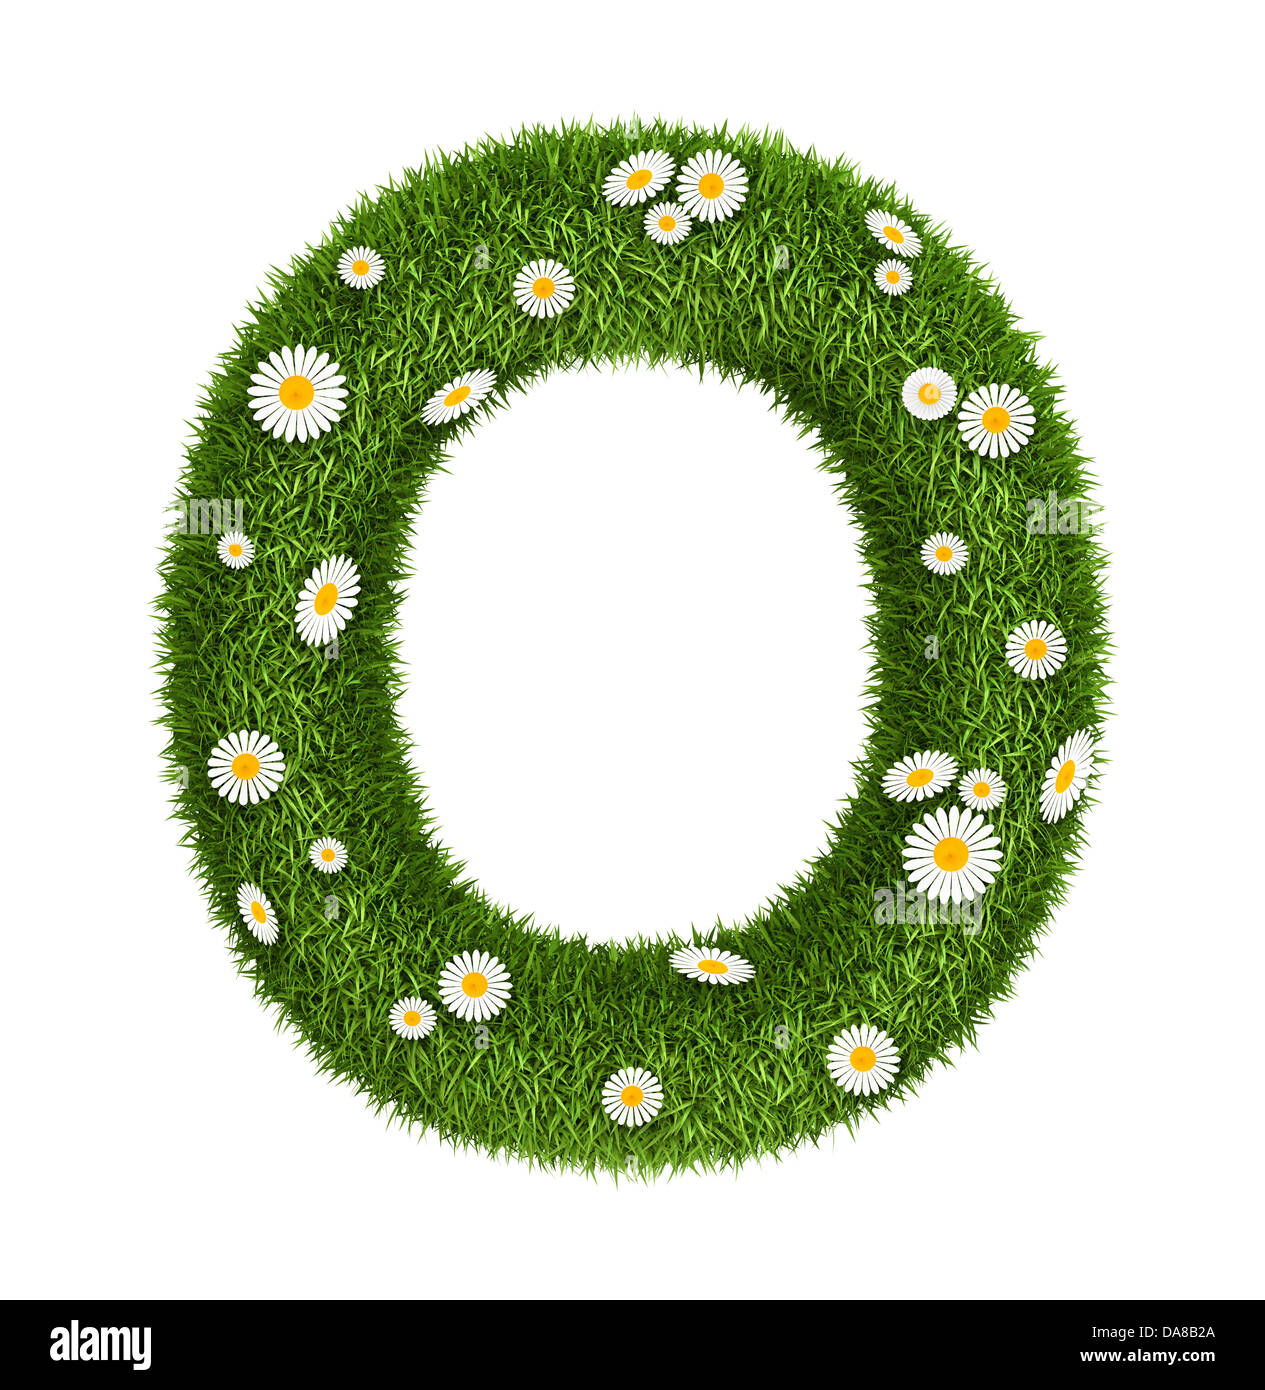 Natural grass letter O Stock Photo